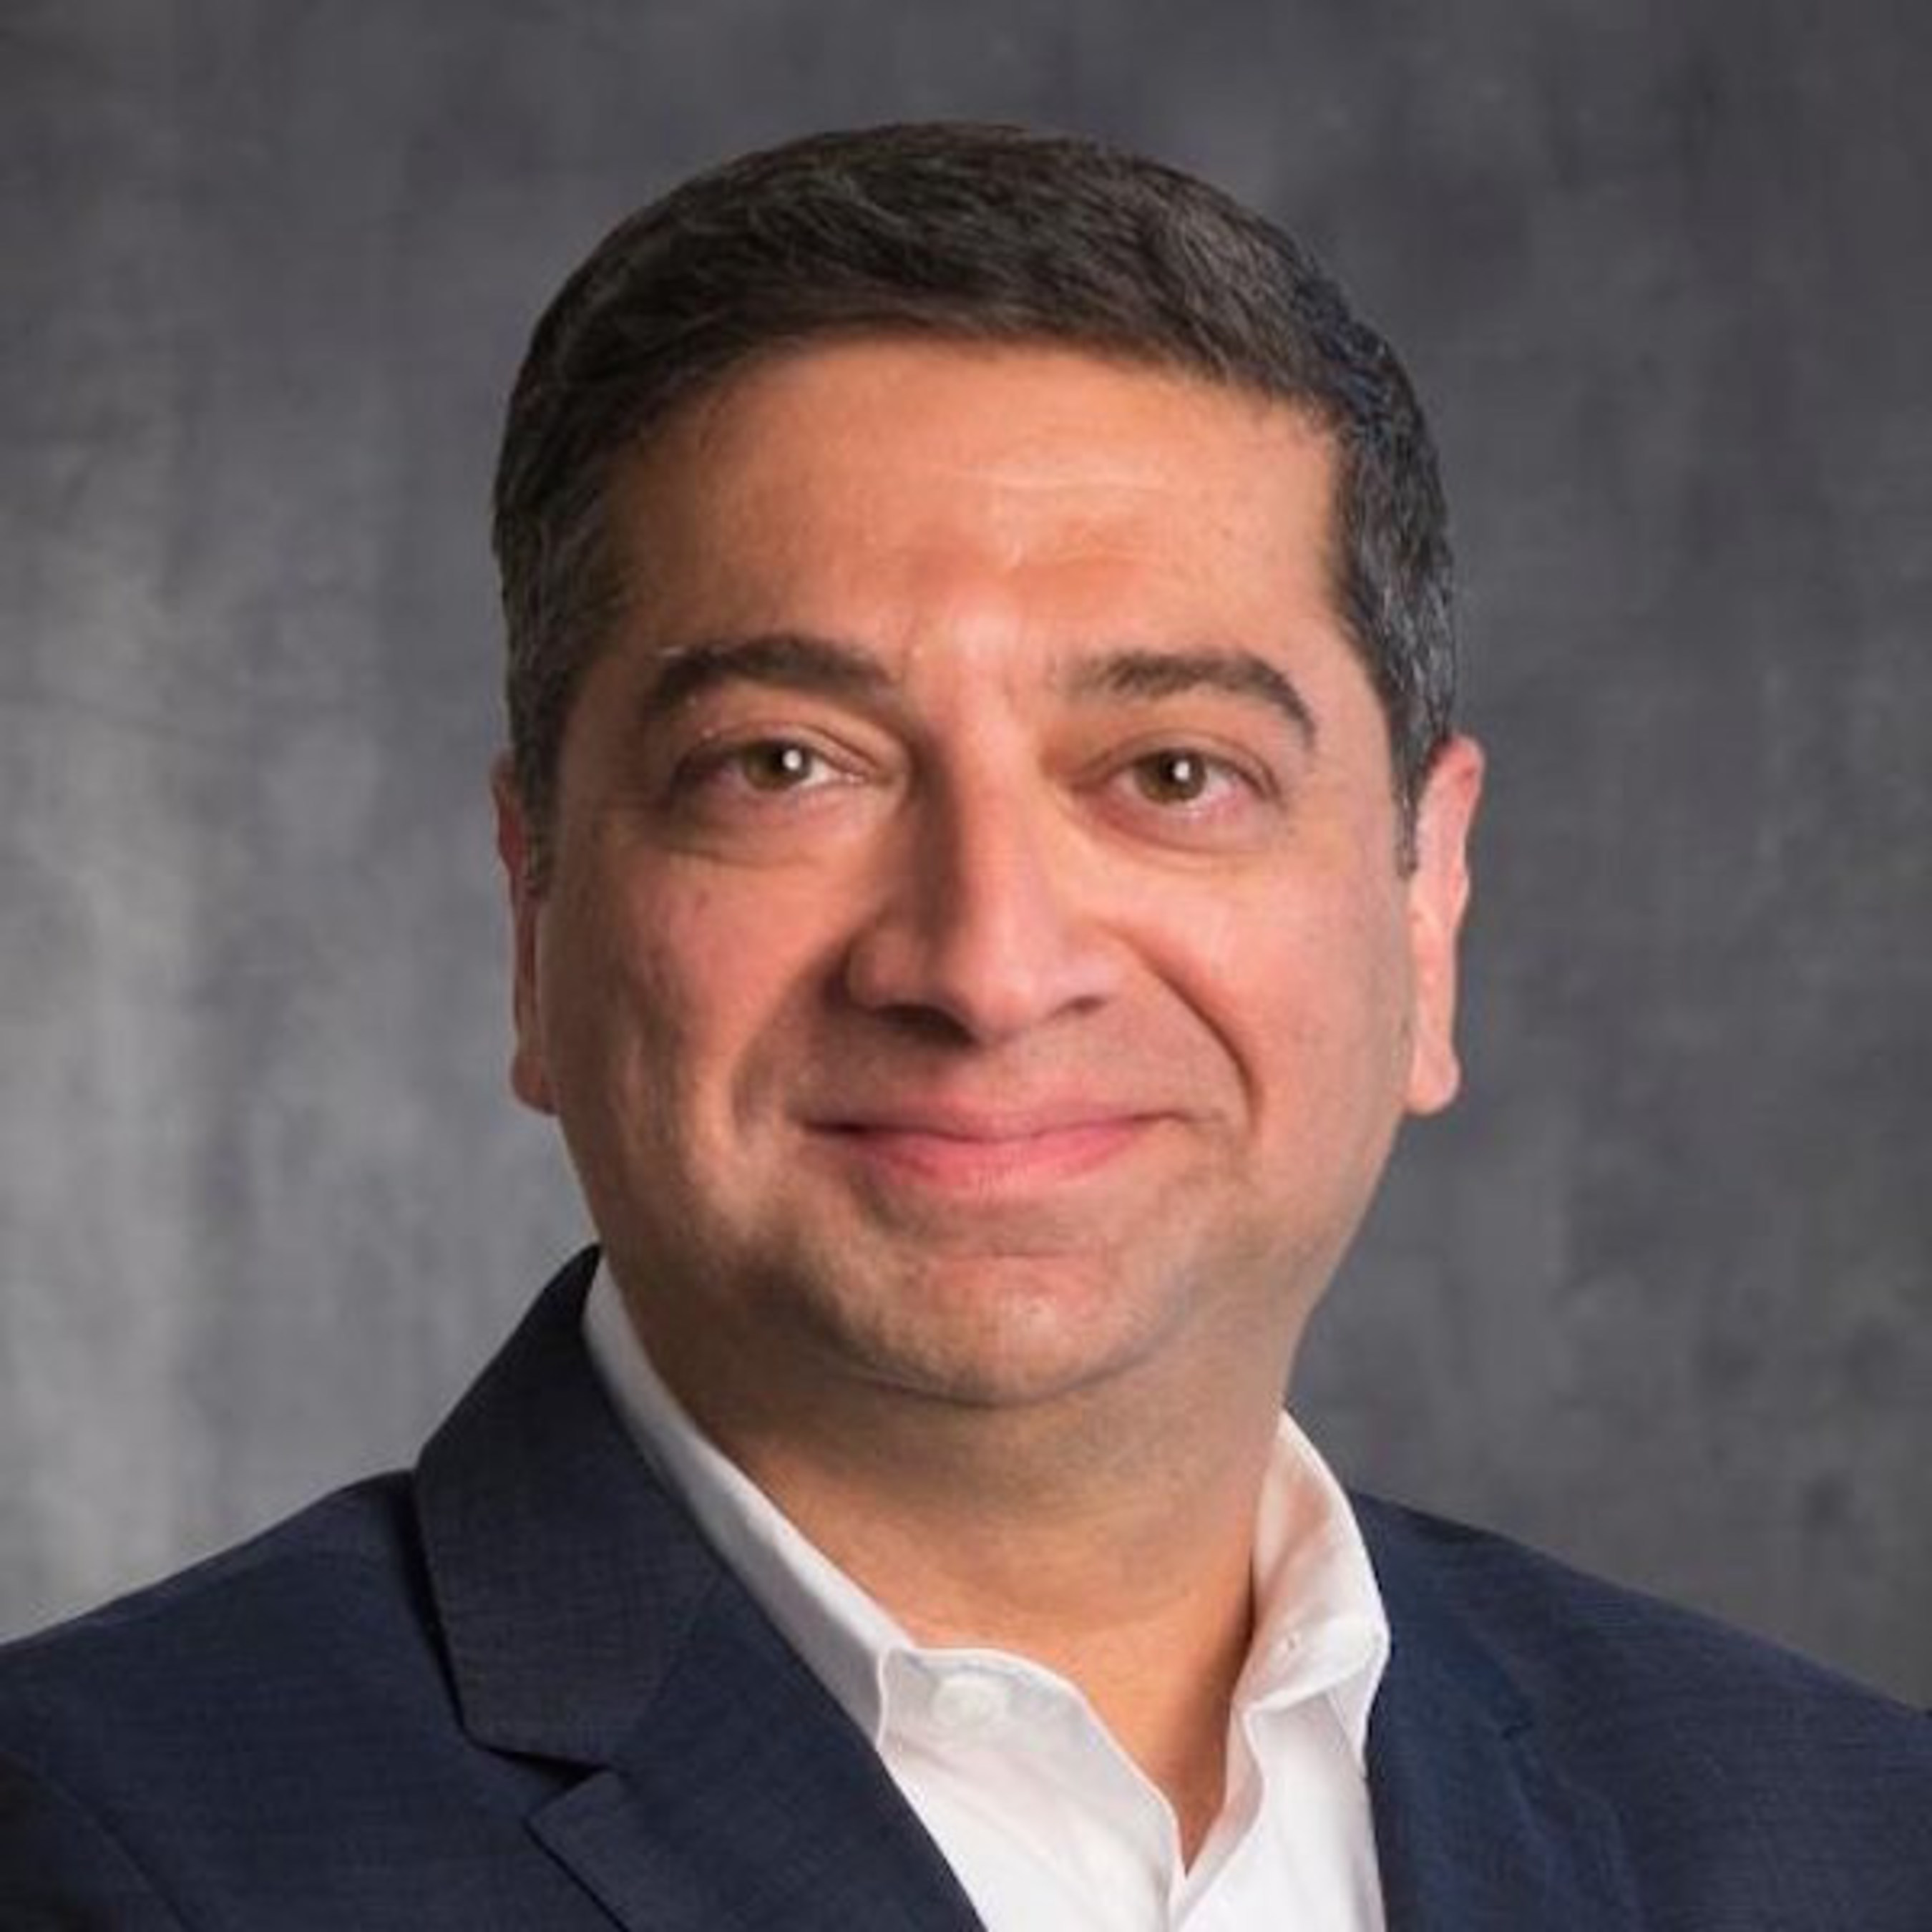 WatchGuard names Prakash Panjwani its new Chief Executive Officer, and adds him to its Board of Directors. Panjwani was previously the CEO at SafeNet and led the global leader in data protection through its recent acquisition by Gemalto for $890 million.